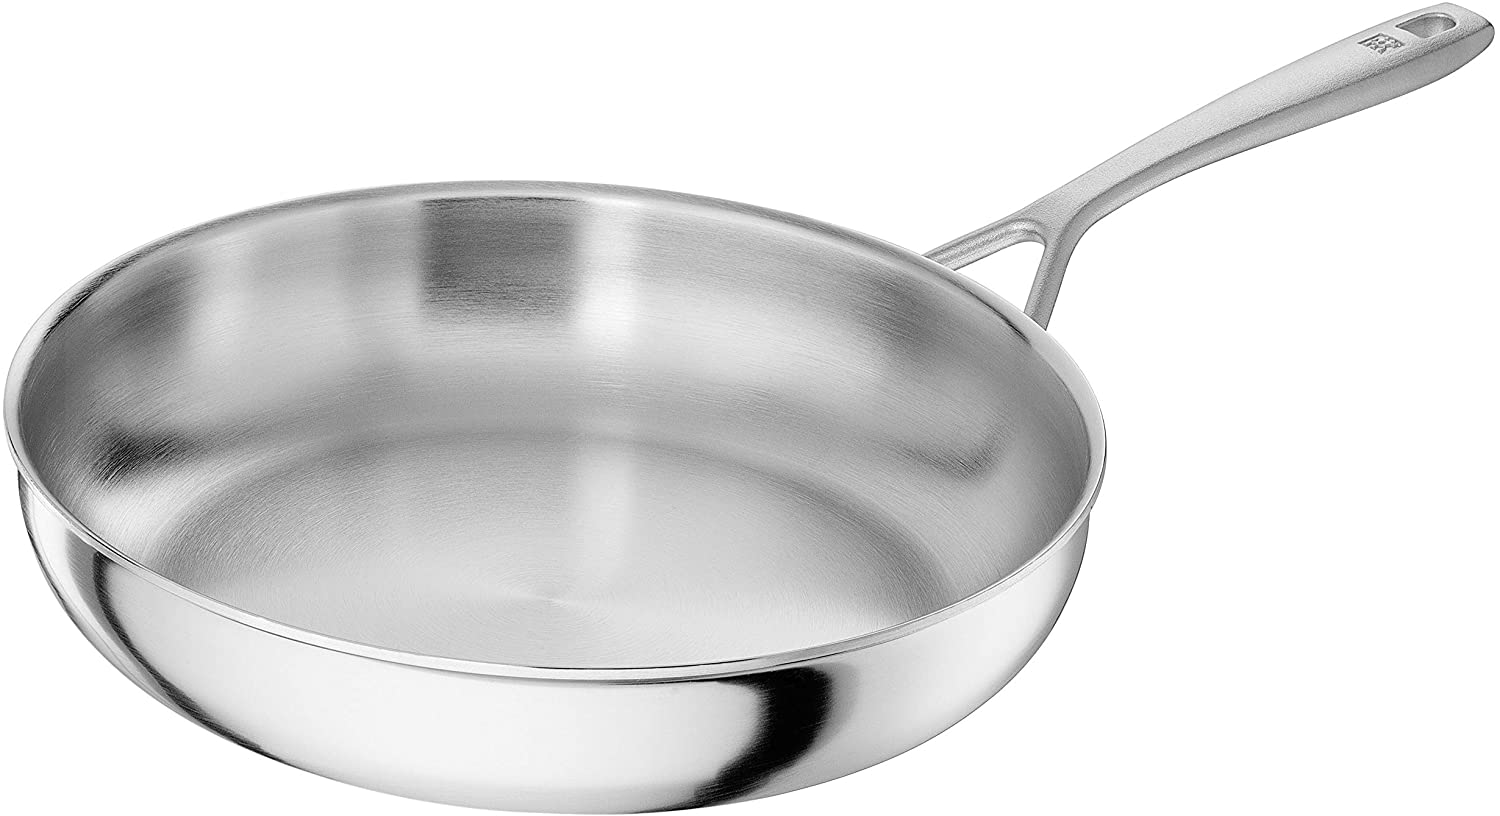 Zwilling Sensation 66008-240-0 Frying Pan 24 cm Suitable for Induction Hobs